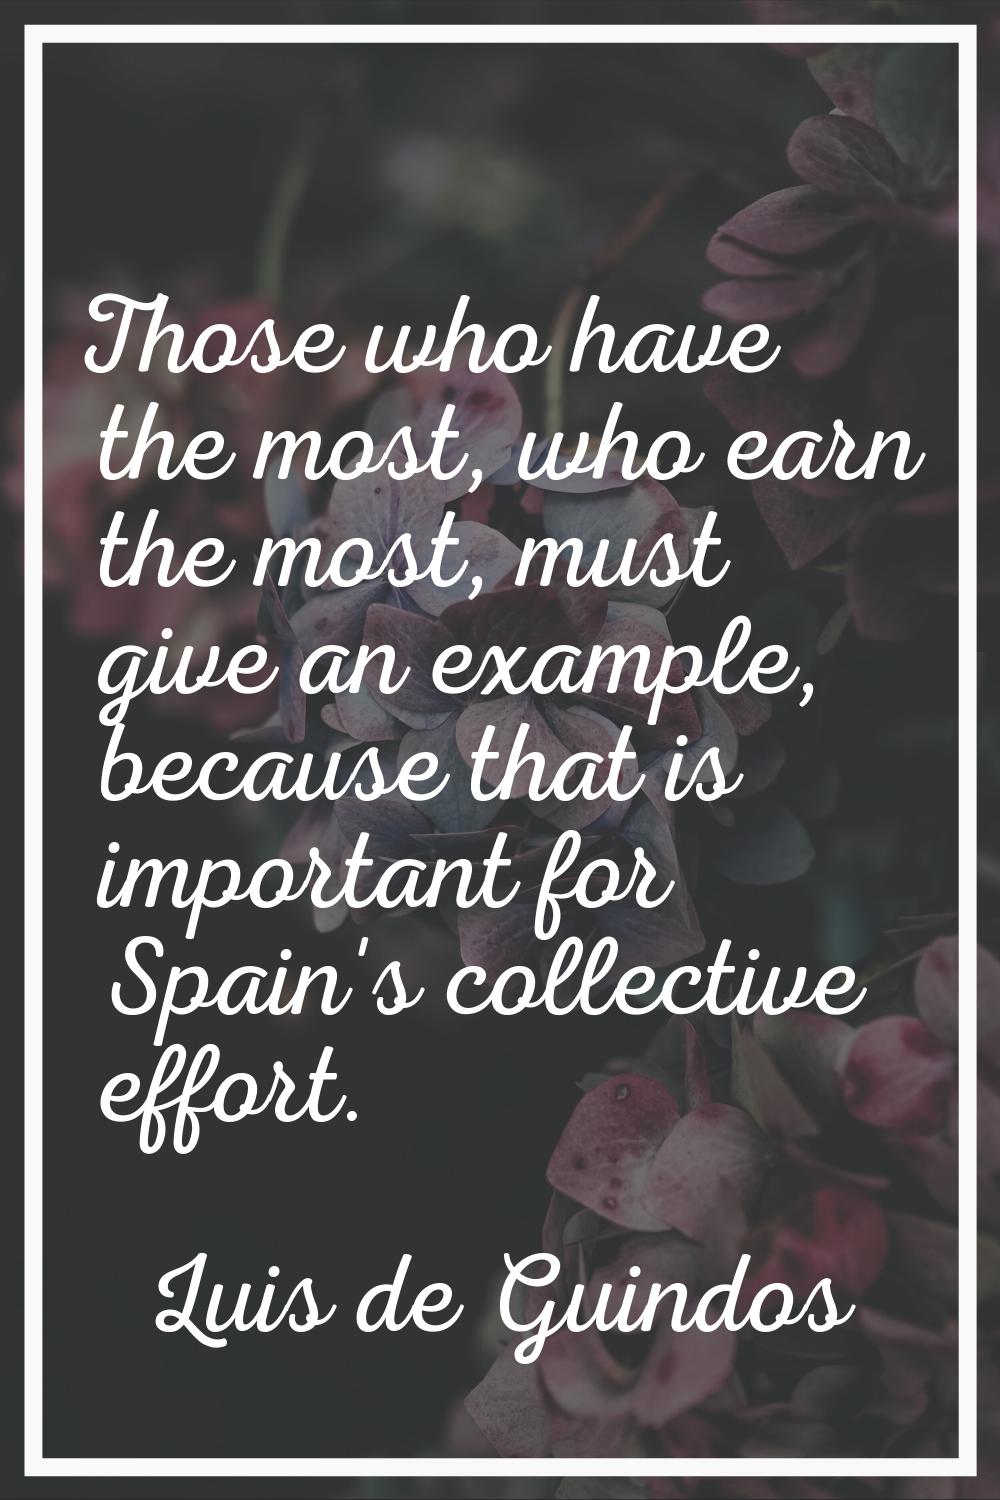 Those who have the most, who earn the most, must give an example, because that is important for Spa